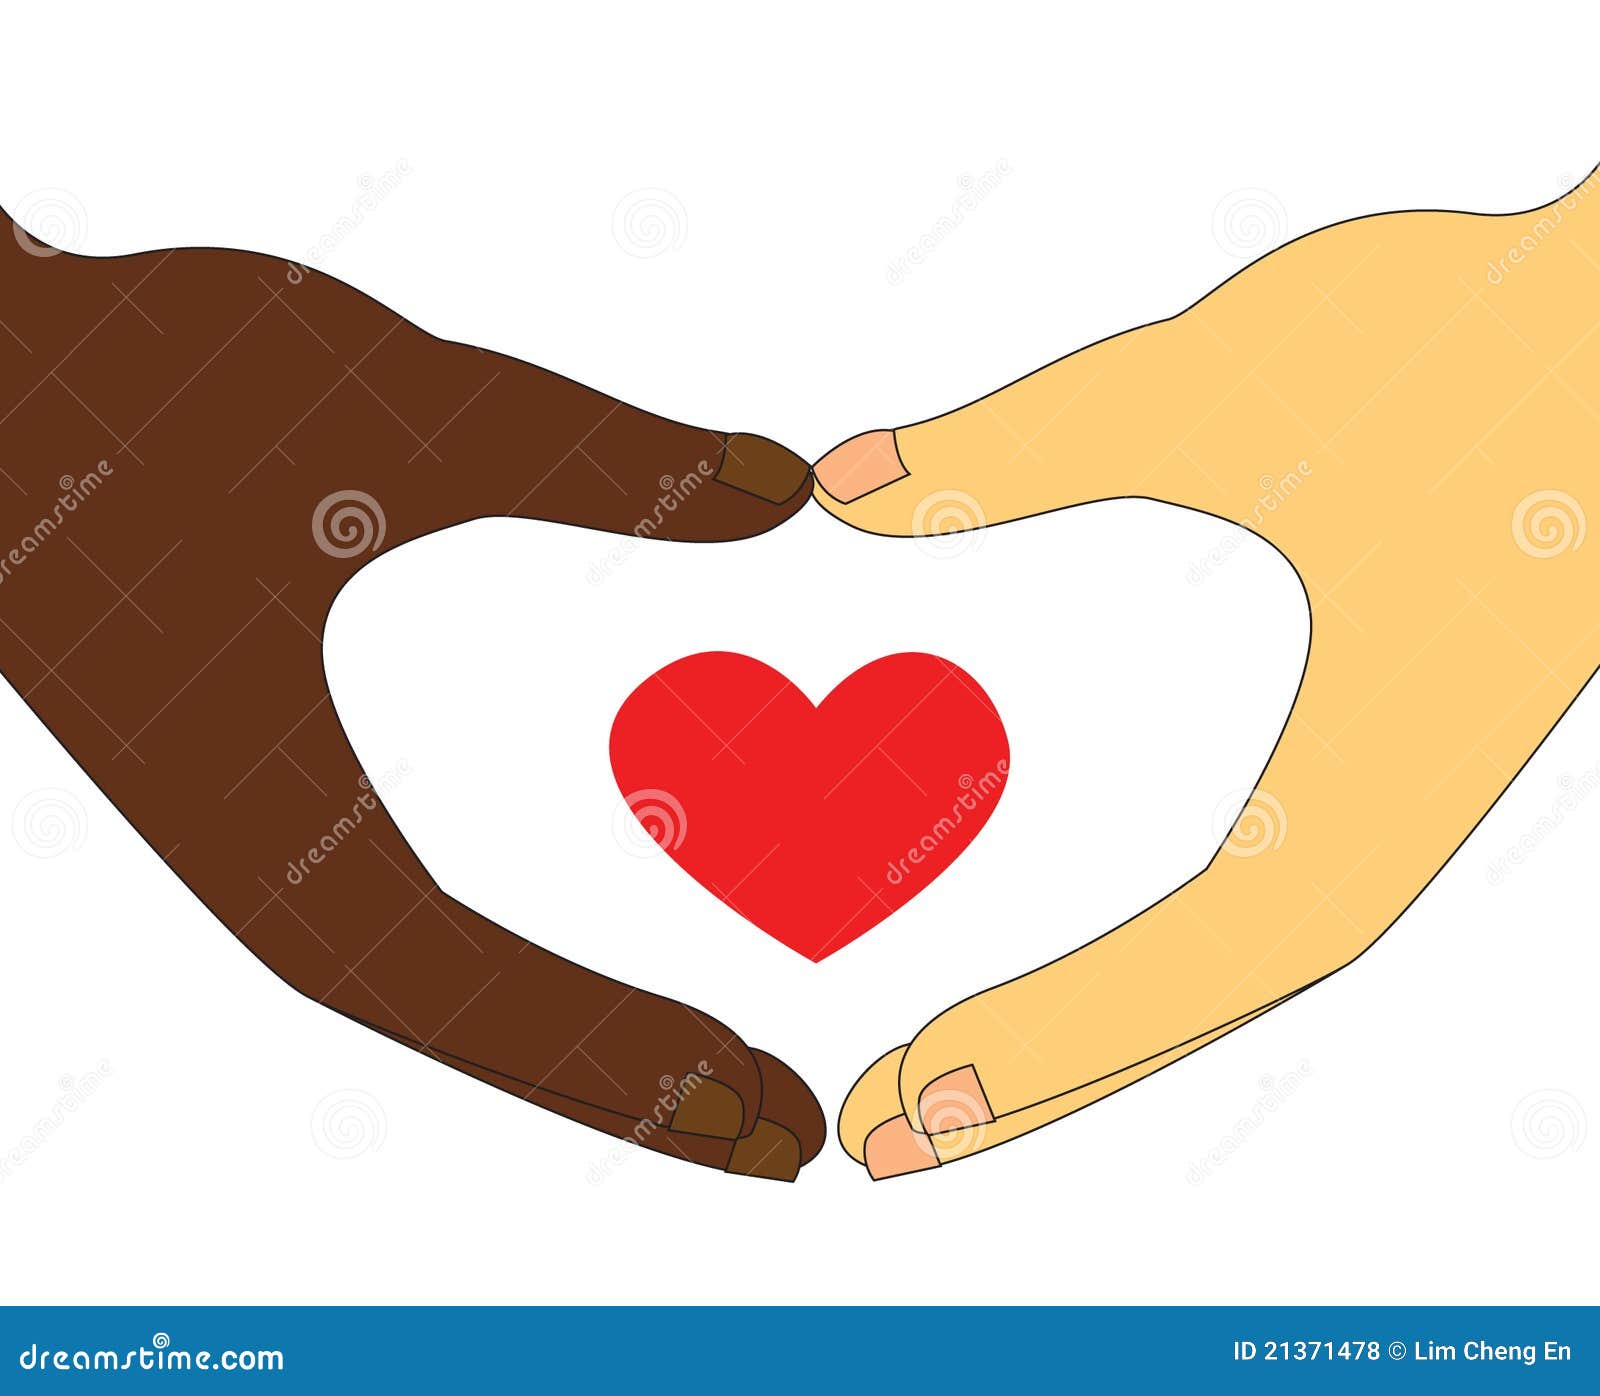 251 Best Swirls images | Couples, Interracial love 